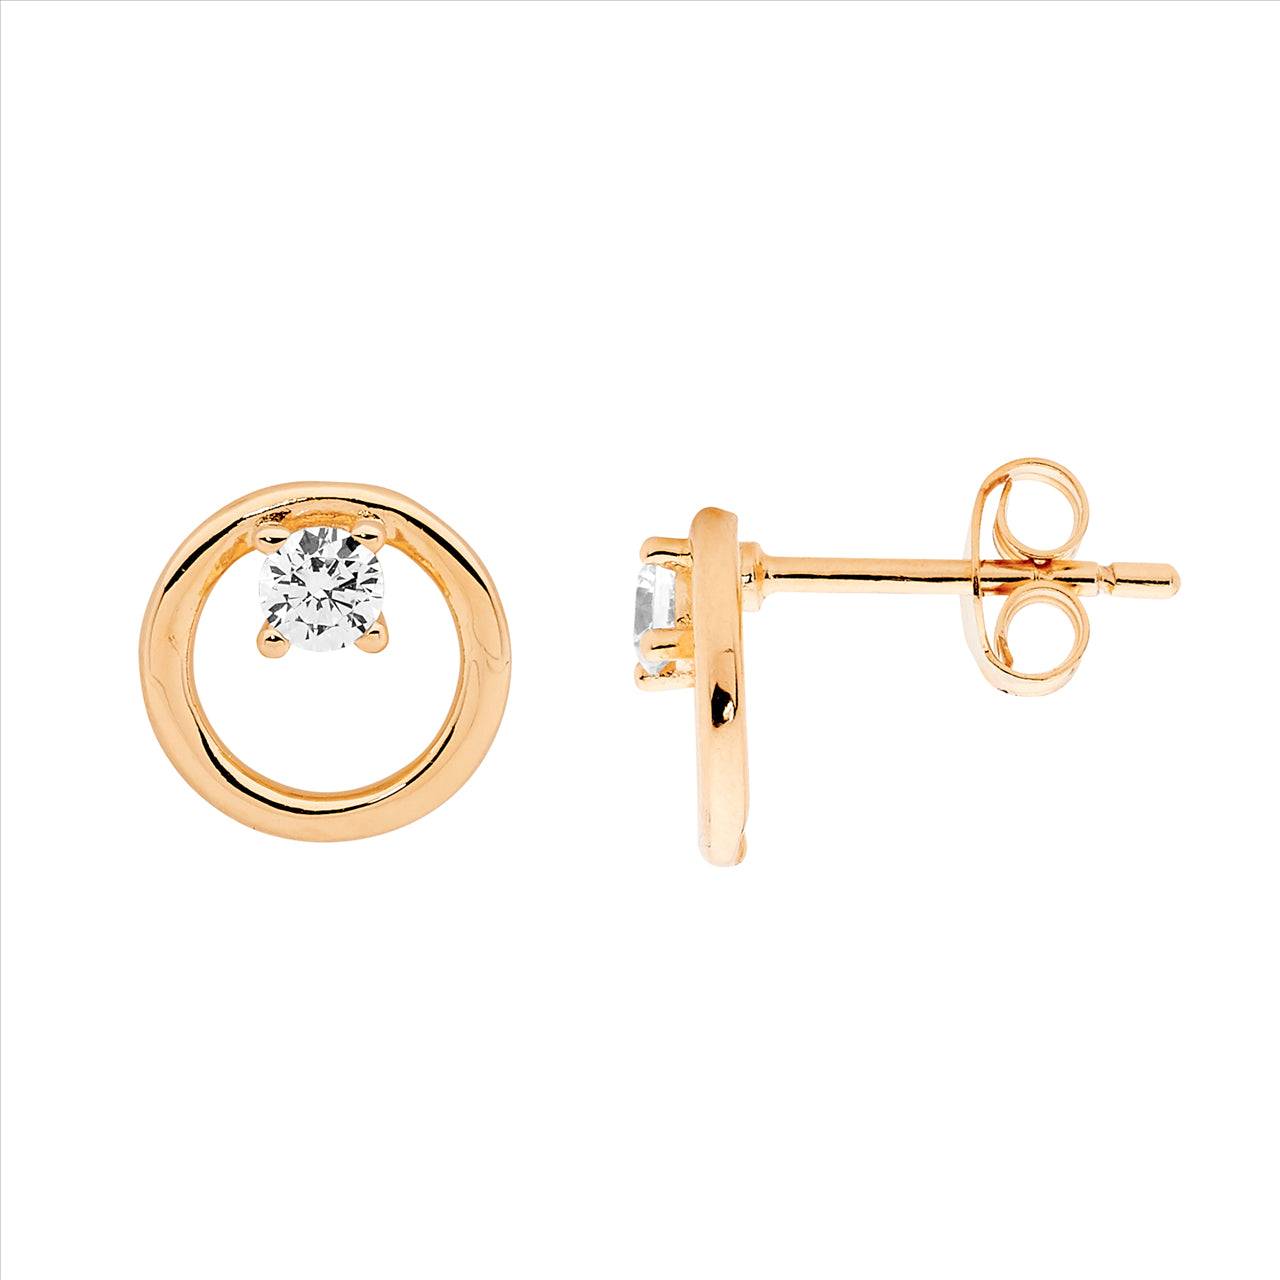 SS 9mm open circle earrings w/WH CZ & rose gold plating